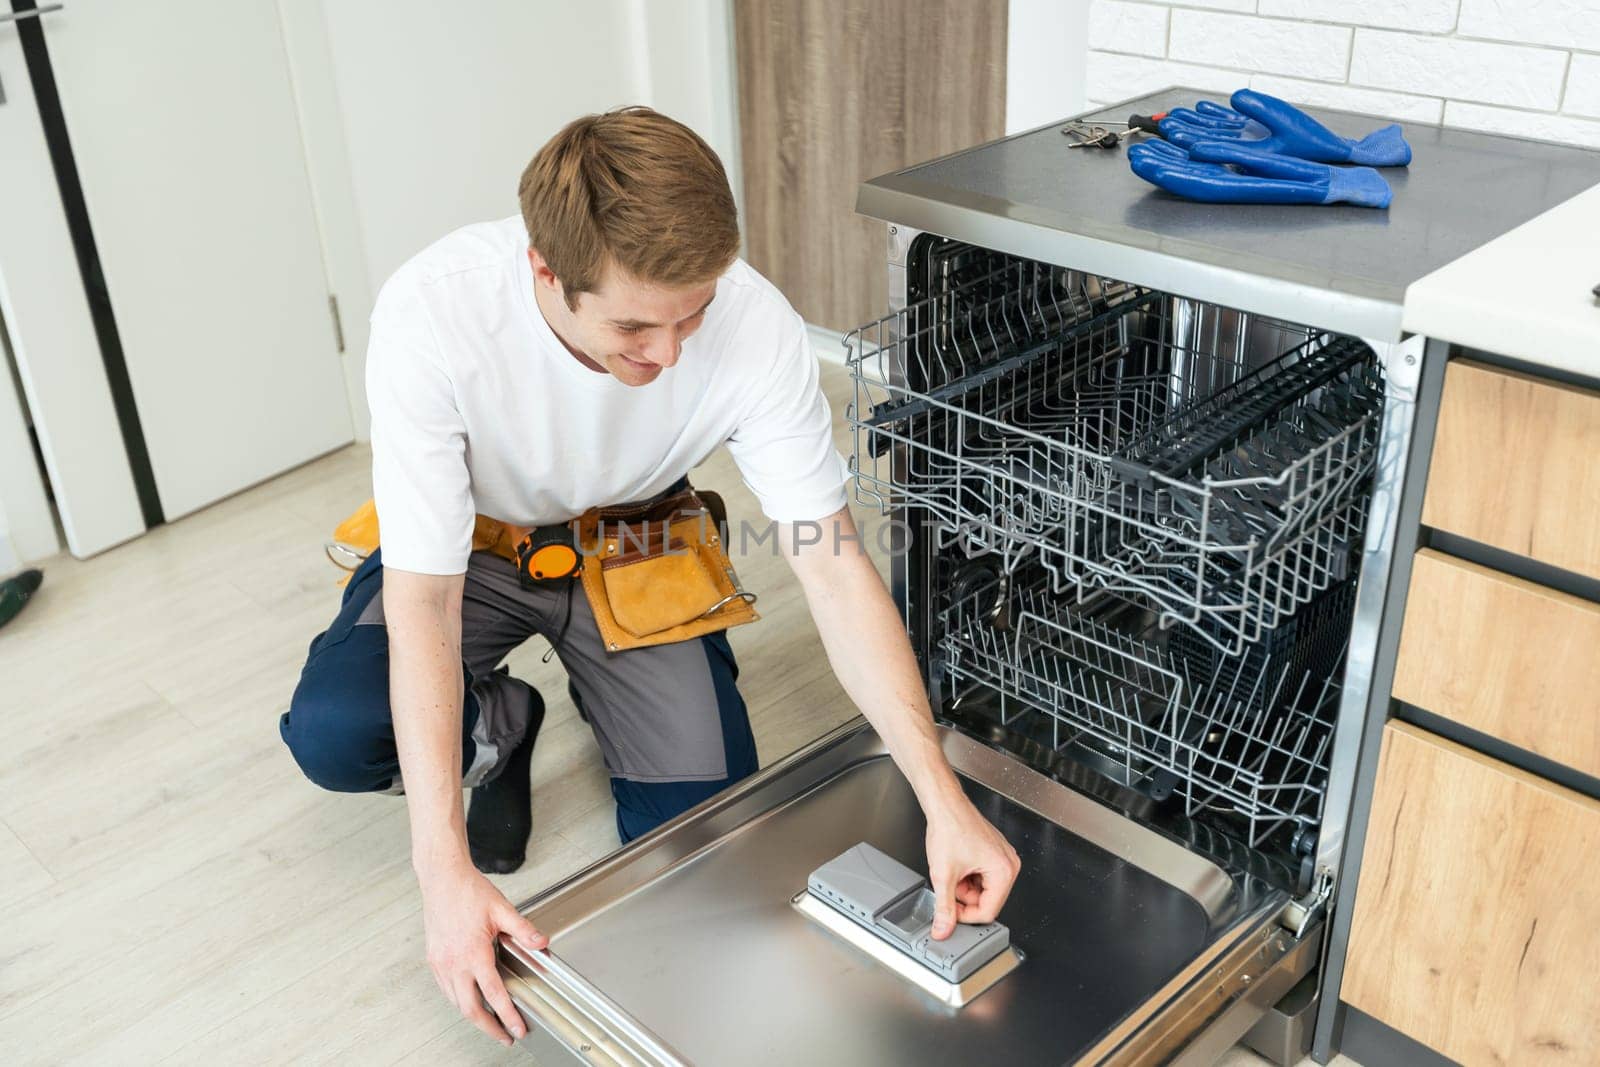 Repairman checks operating state of dishwasher in kitchen by Andelov13